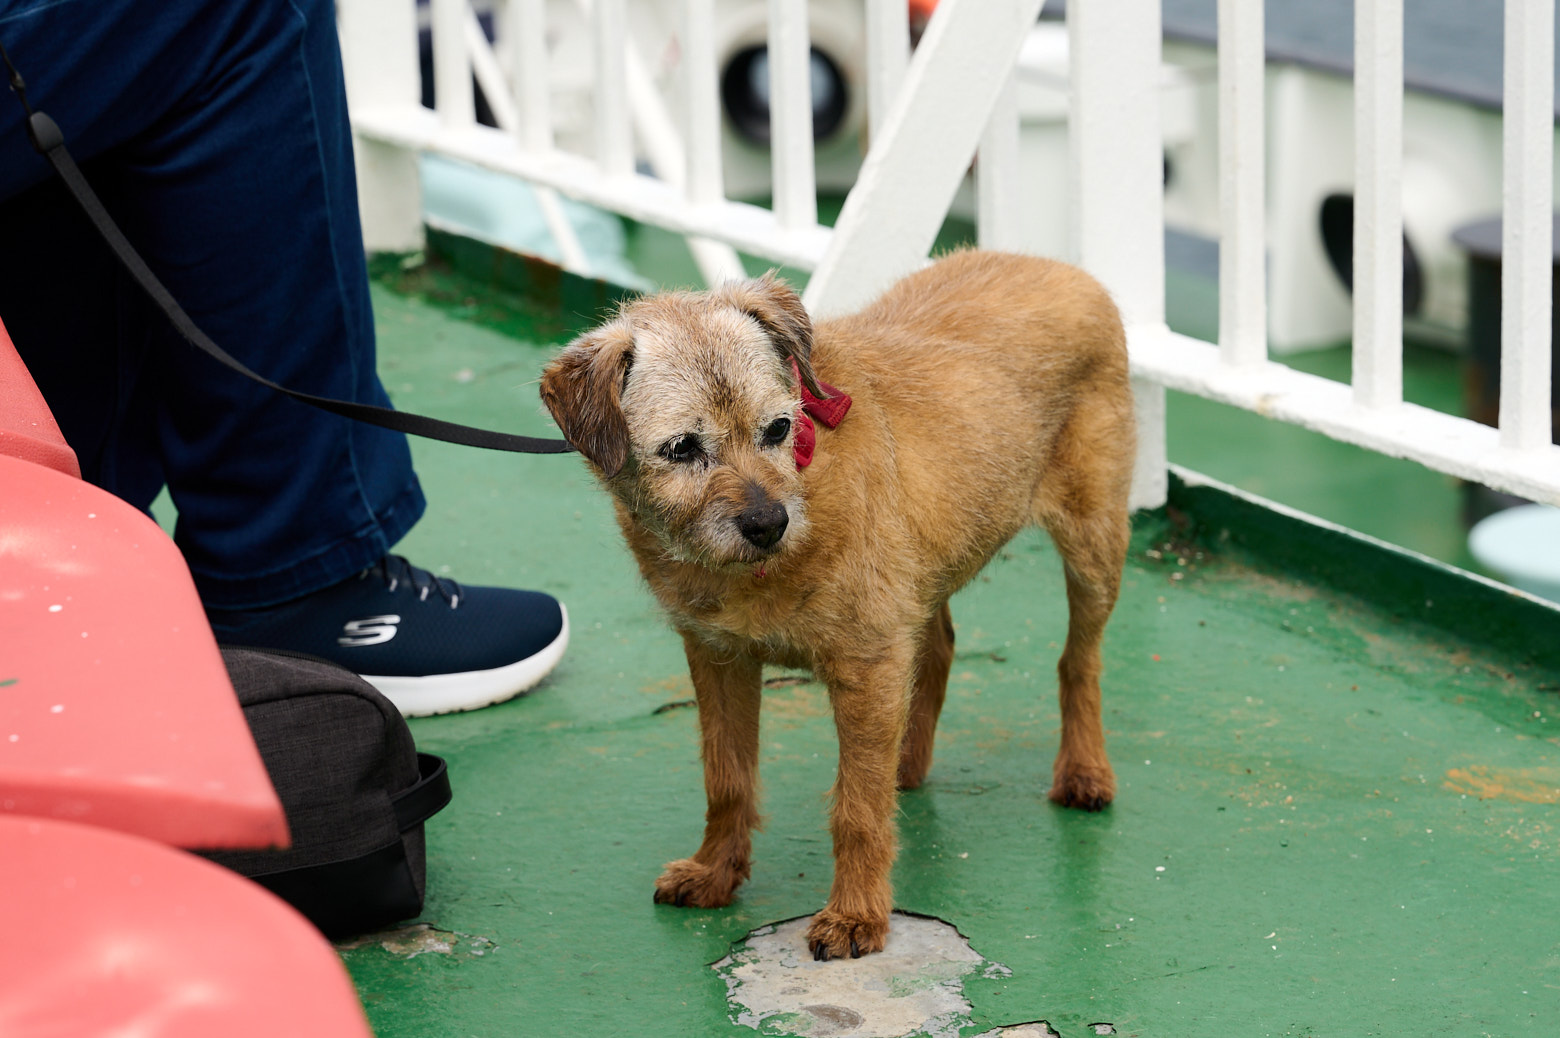 On the ferry from Oban to Barra in the Outer Hebrides.